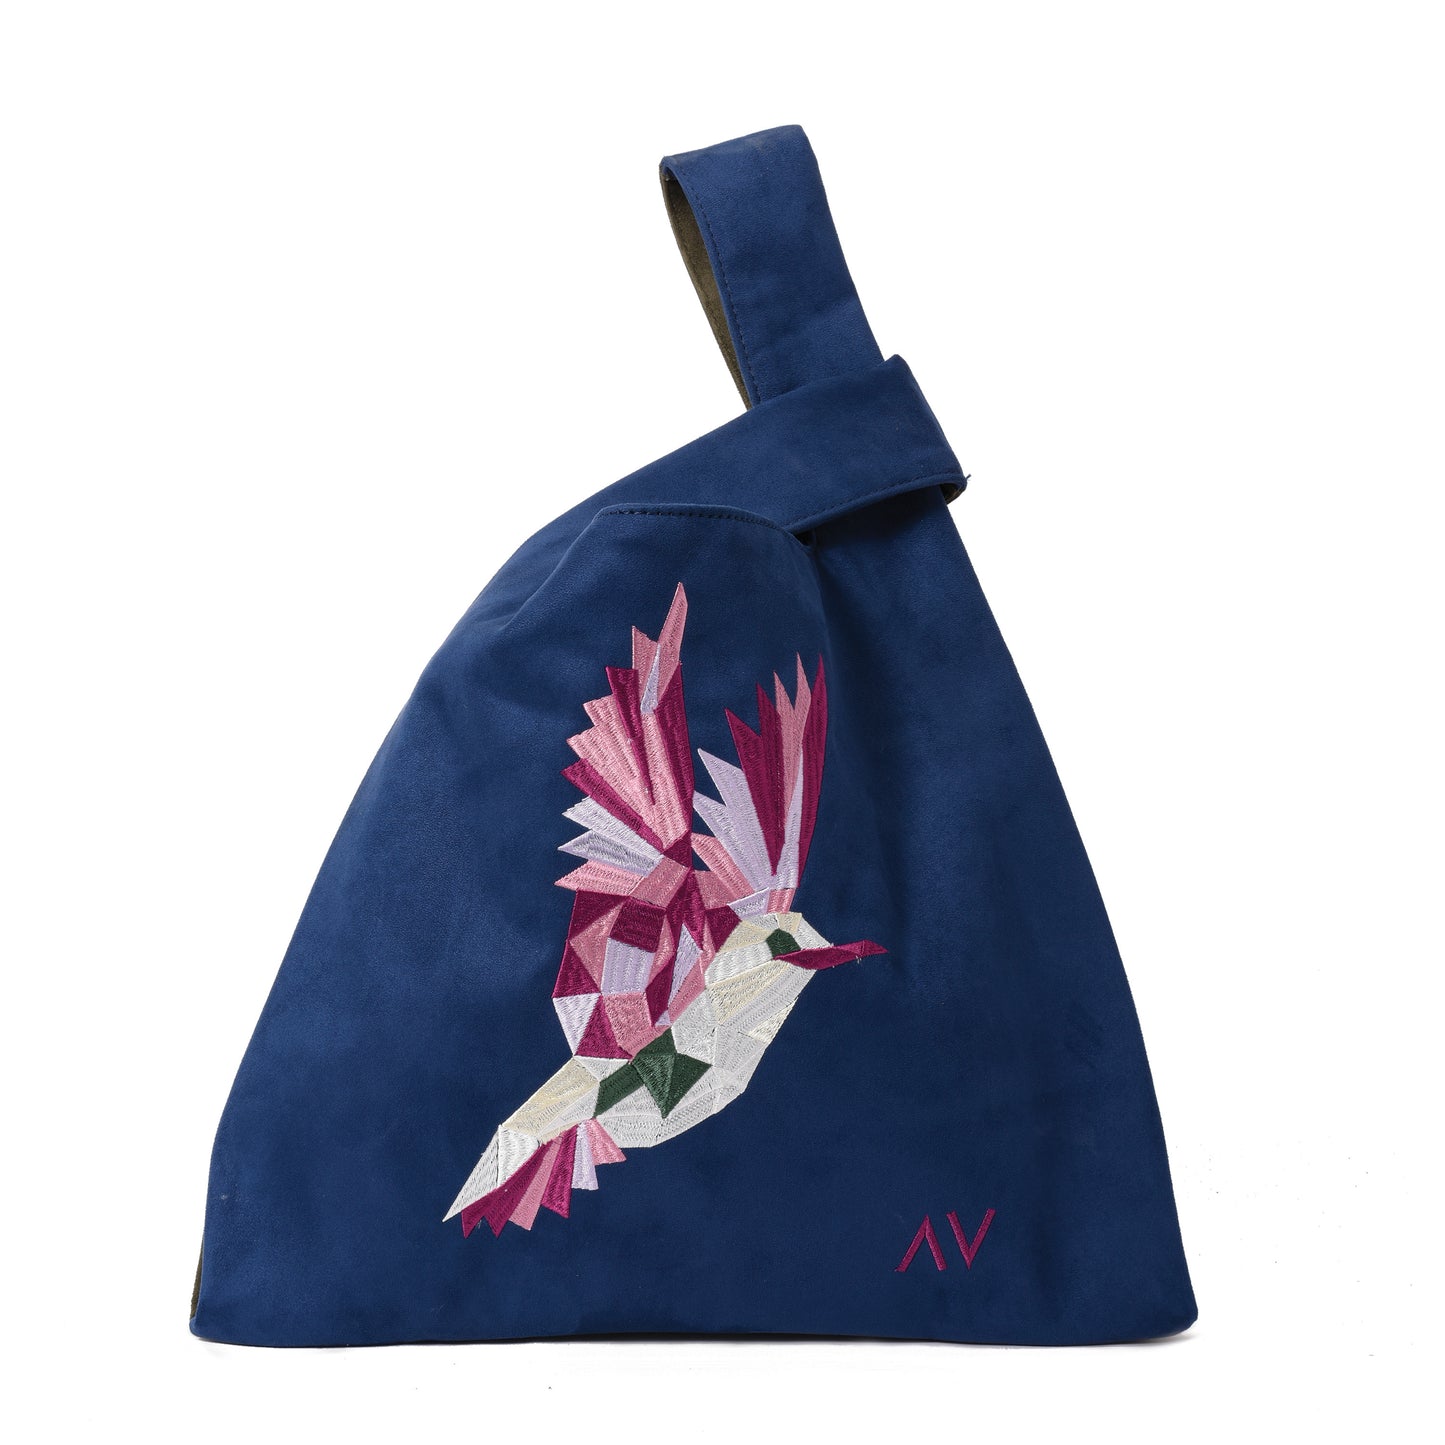 Knot Navy/Olive Handbag with bird embroidery - Code 922